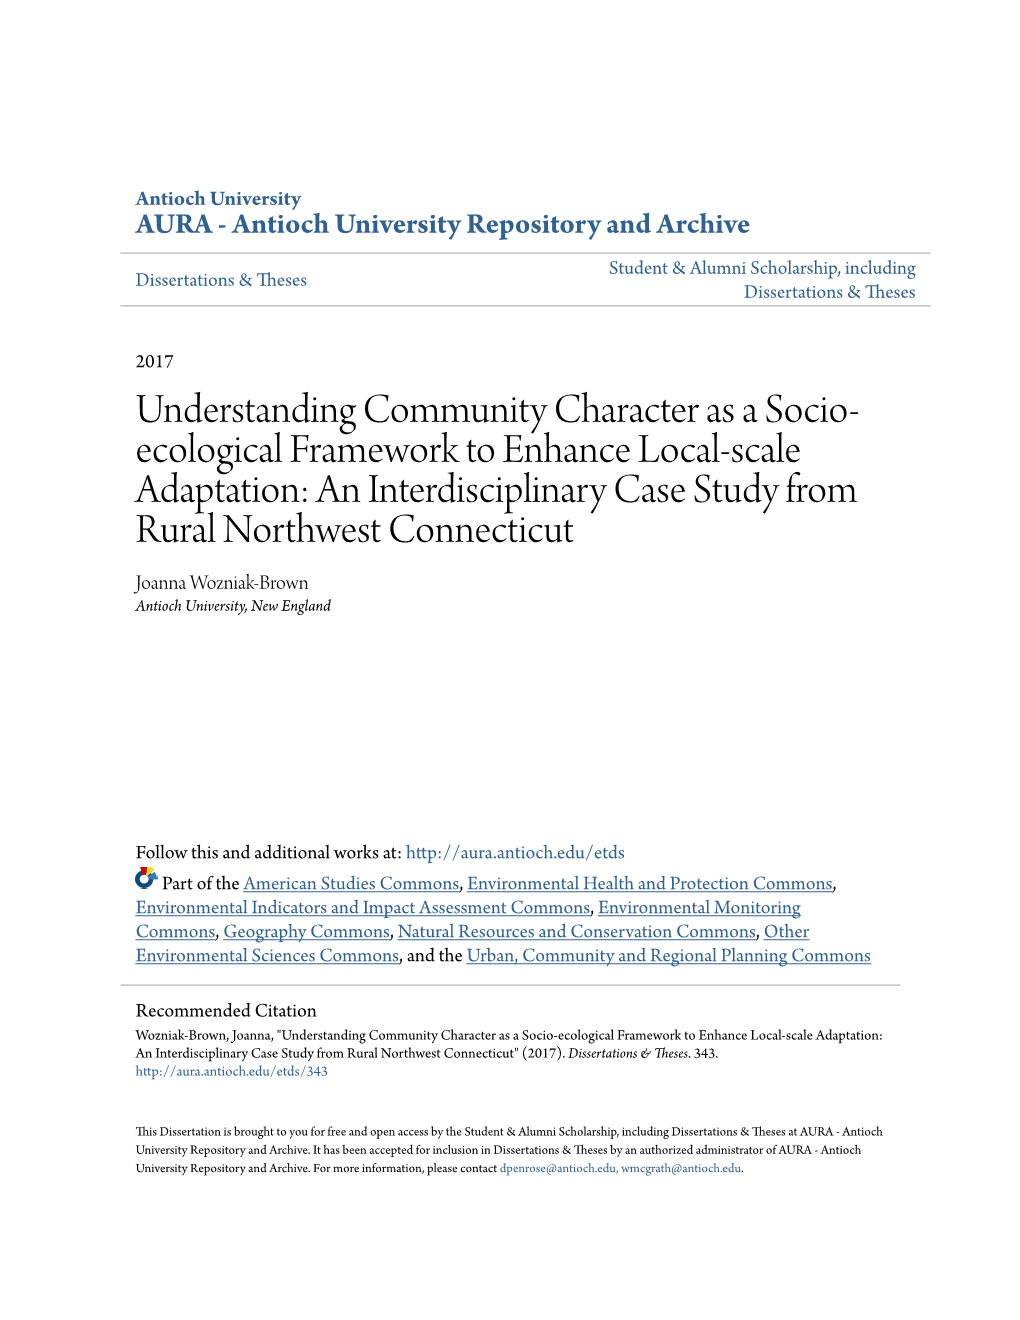 Understanding Community Character As a Socio-Ecological Framework To